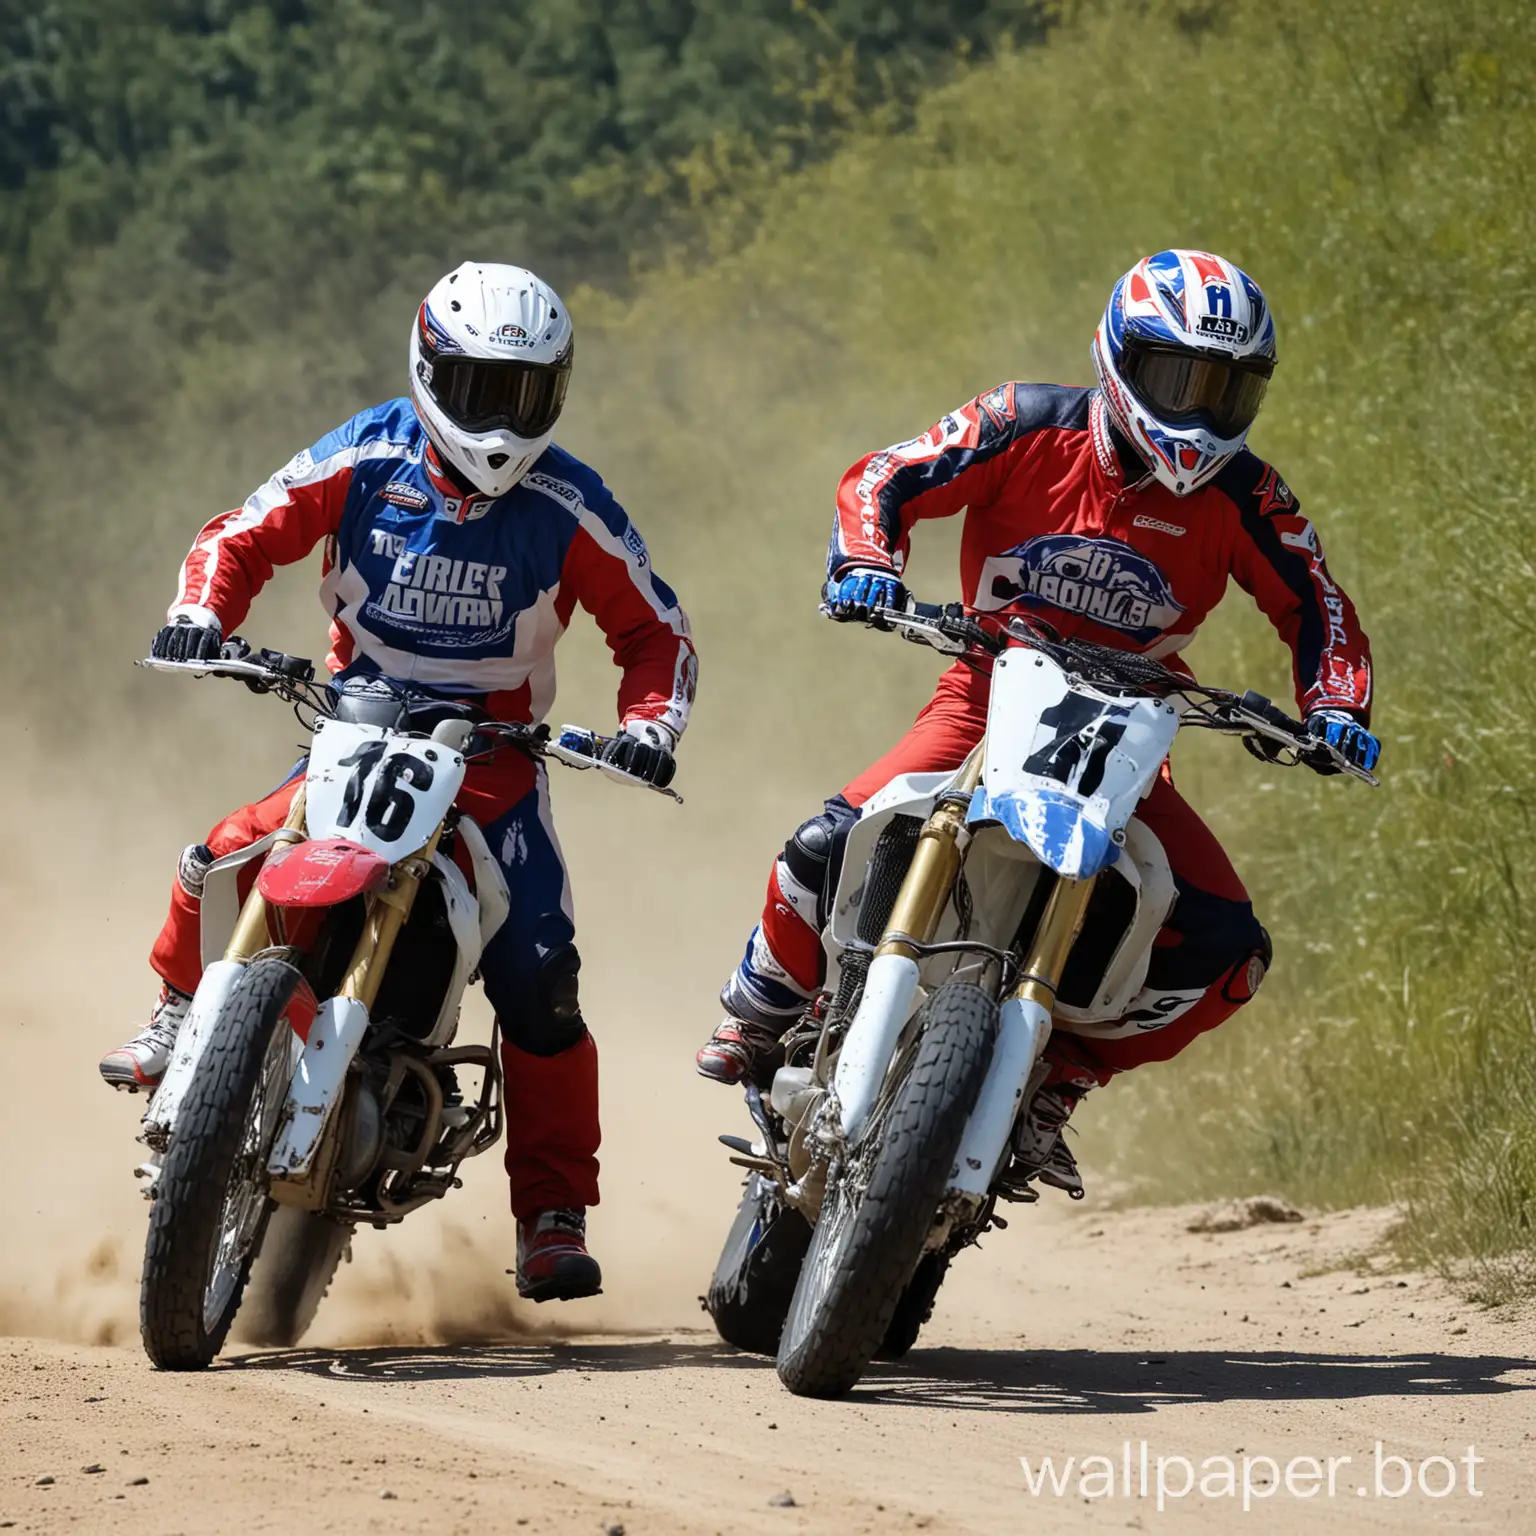 Intense-Moto-Race-Two-Bikers-Speeding-in-Dynamic-Red-White-and-Blue